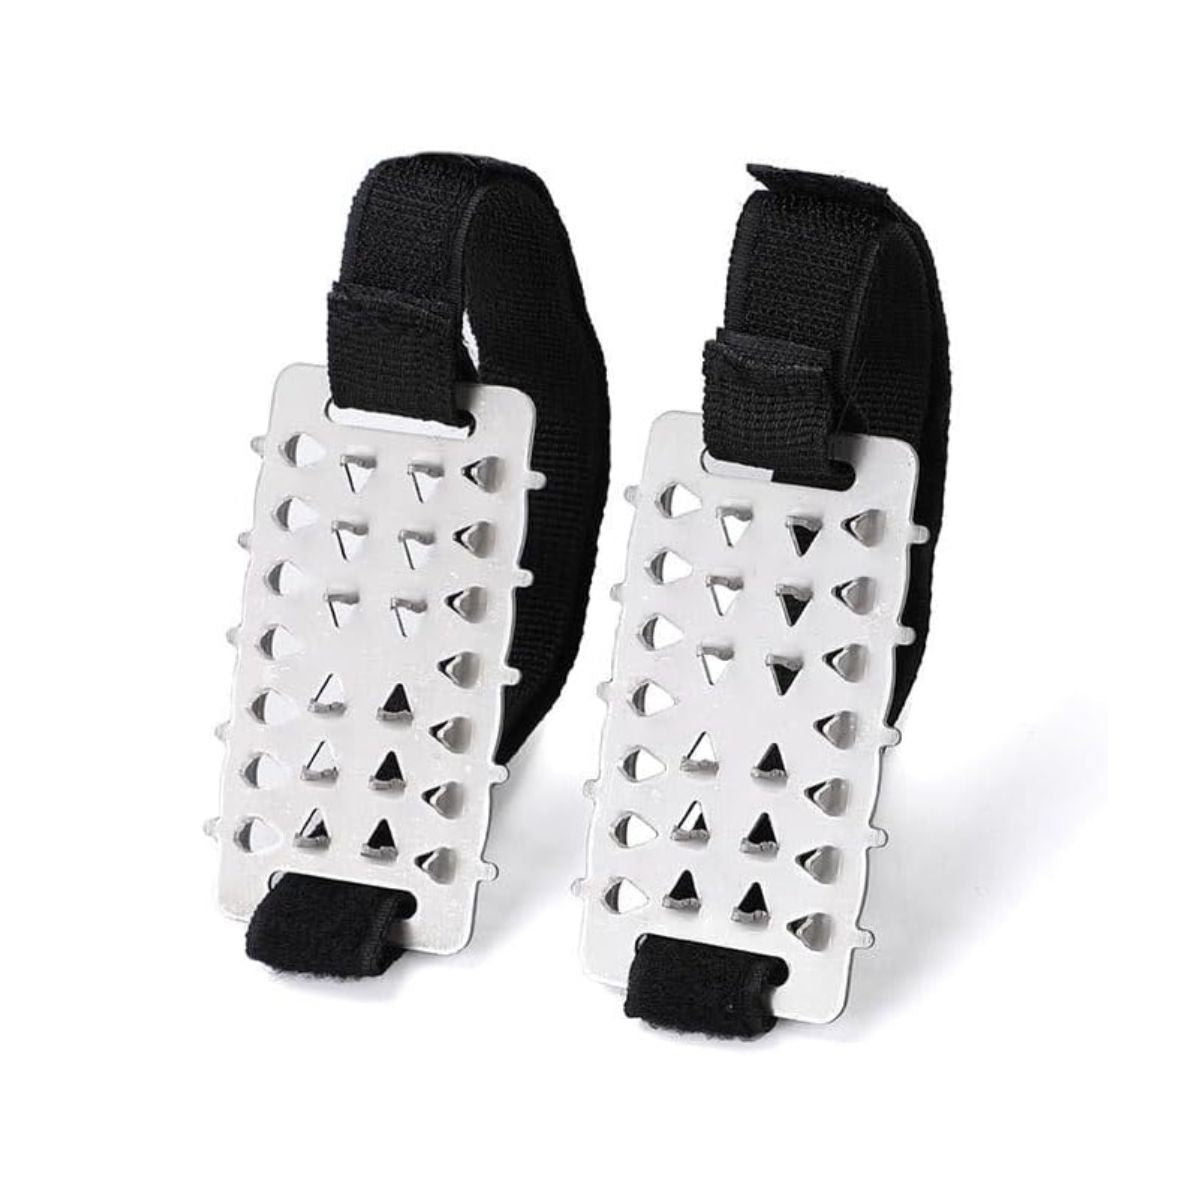 Pocket Crampons/Shoe Grip with 26 Spikes for Ice/Snow 1